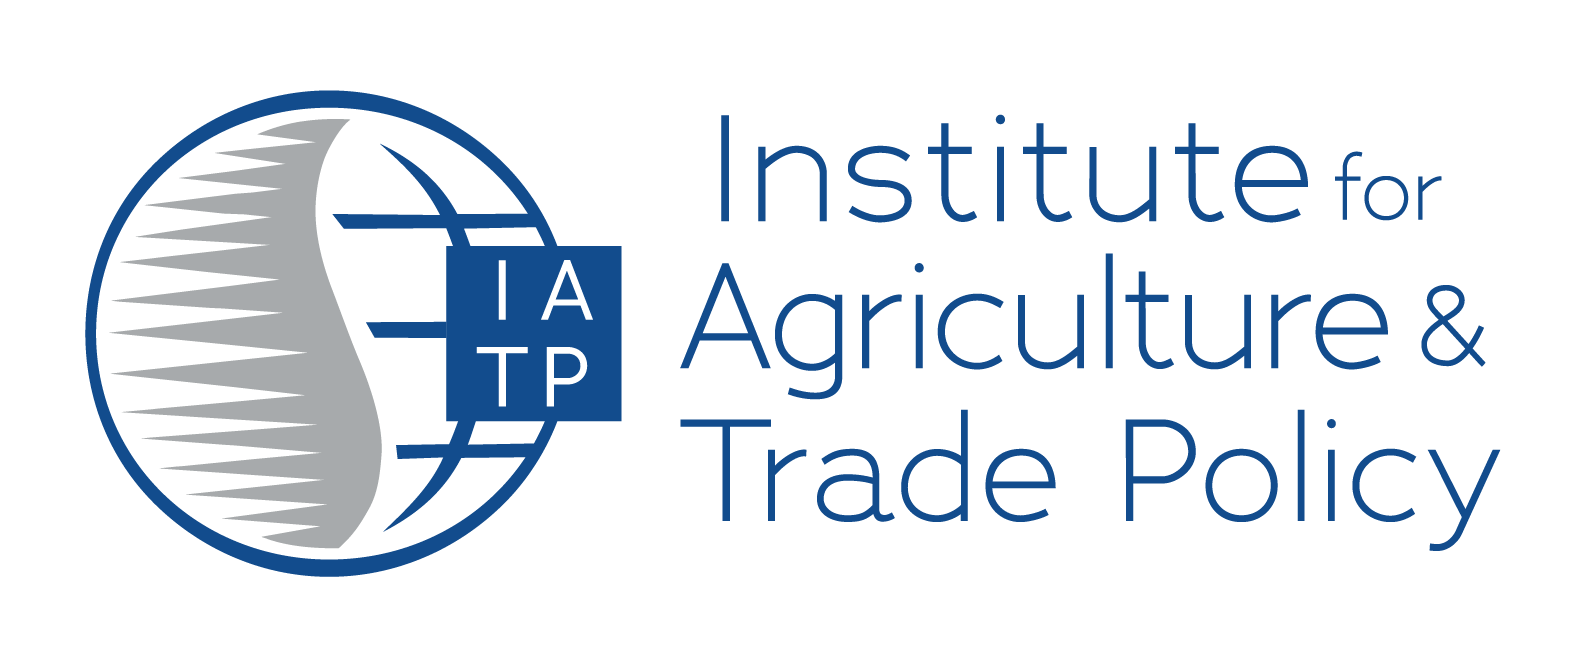 Institute for Agriculture and Trade Policy